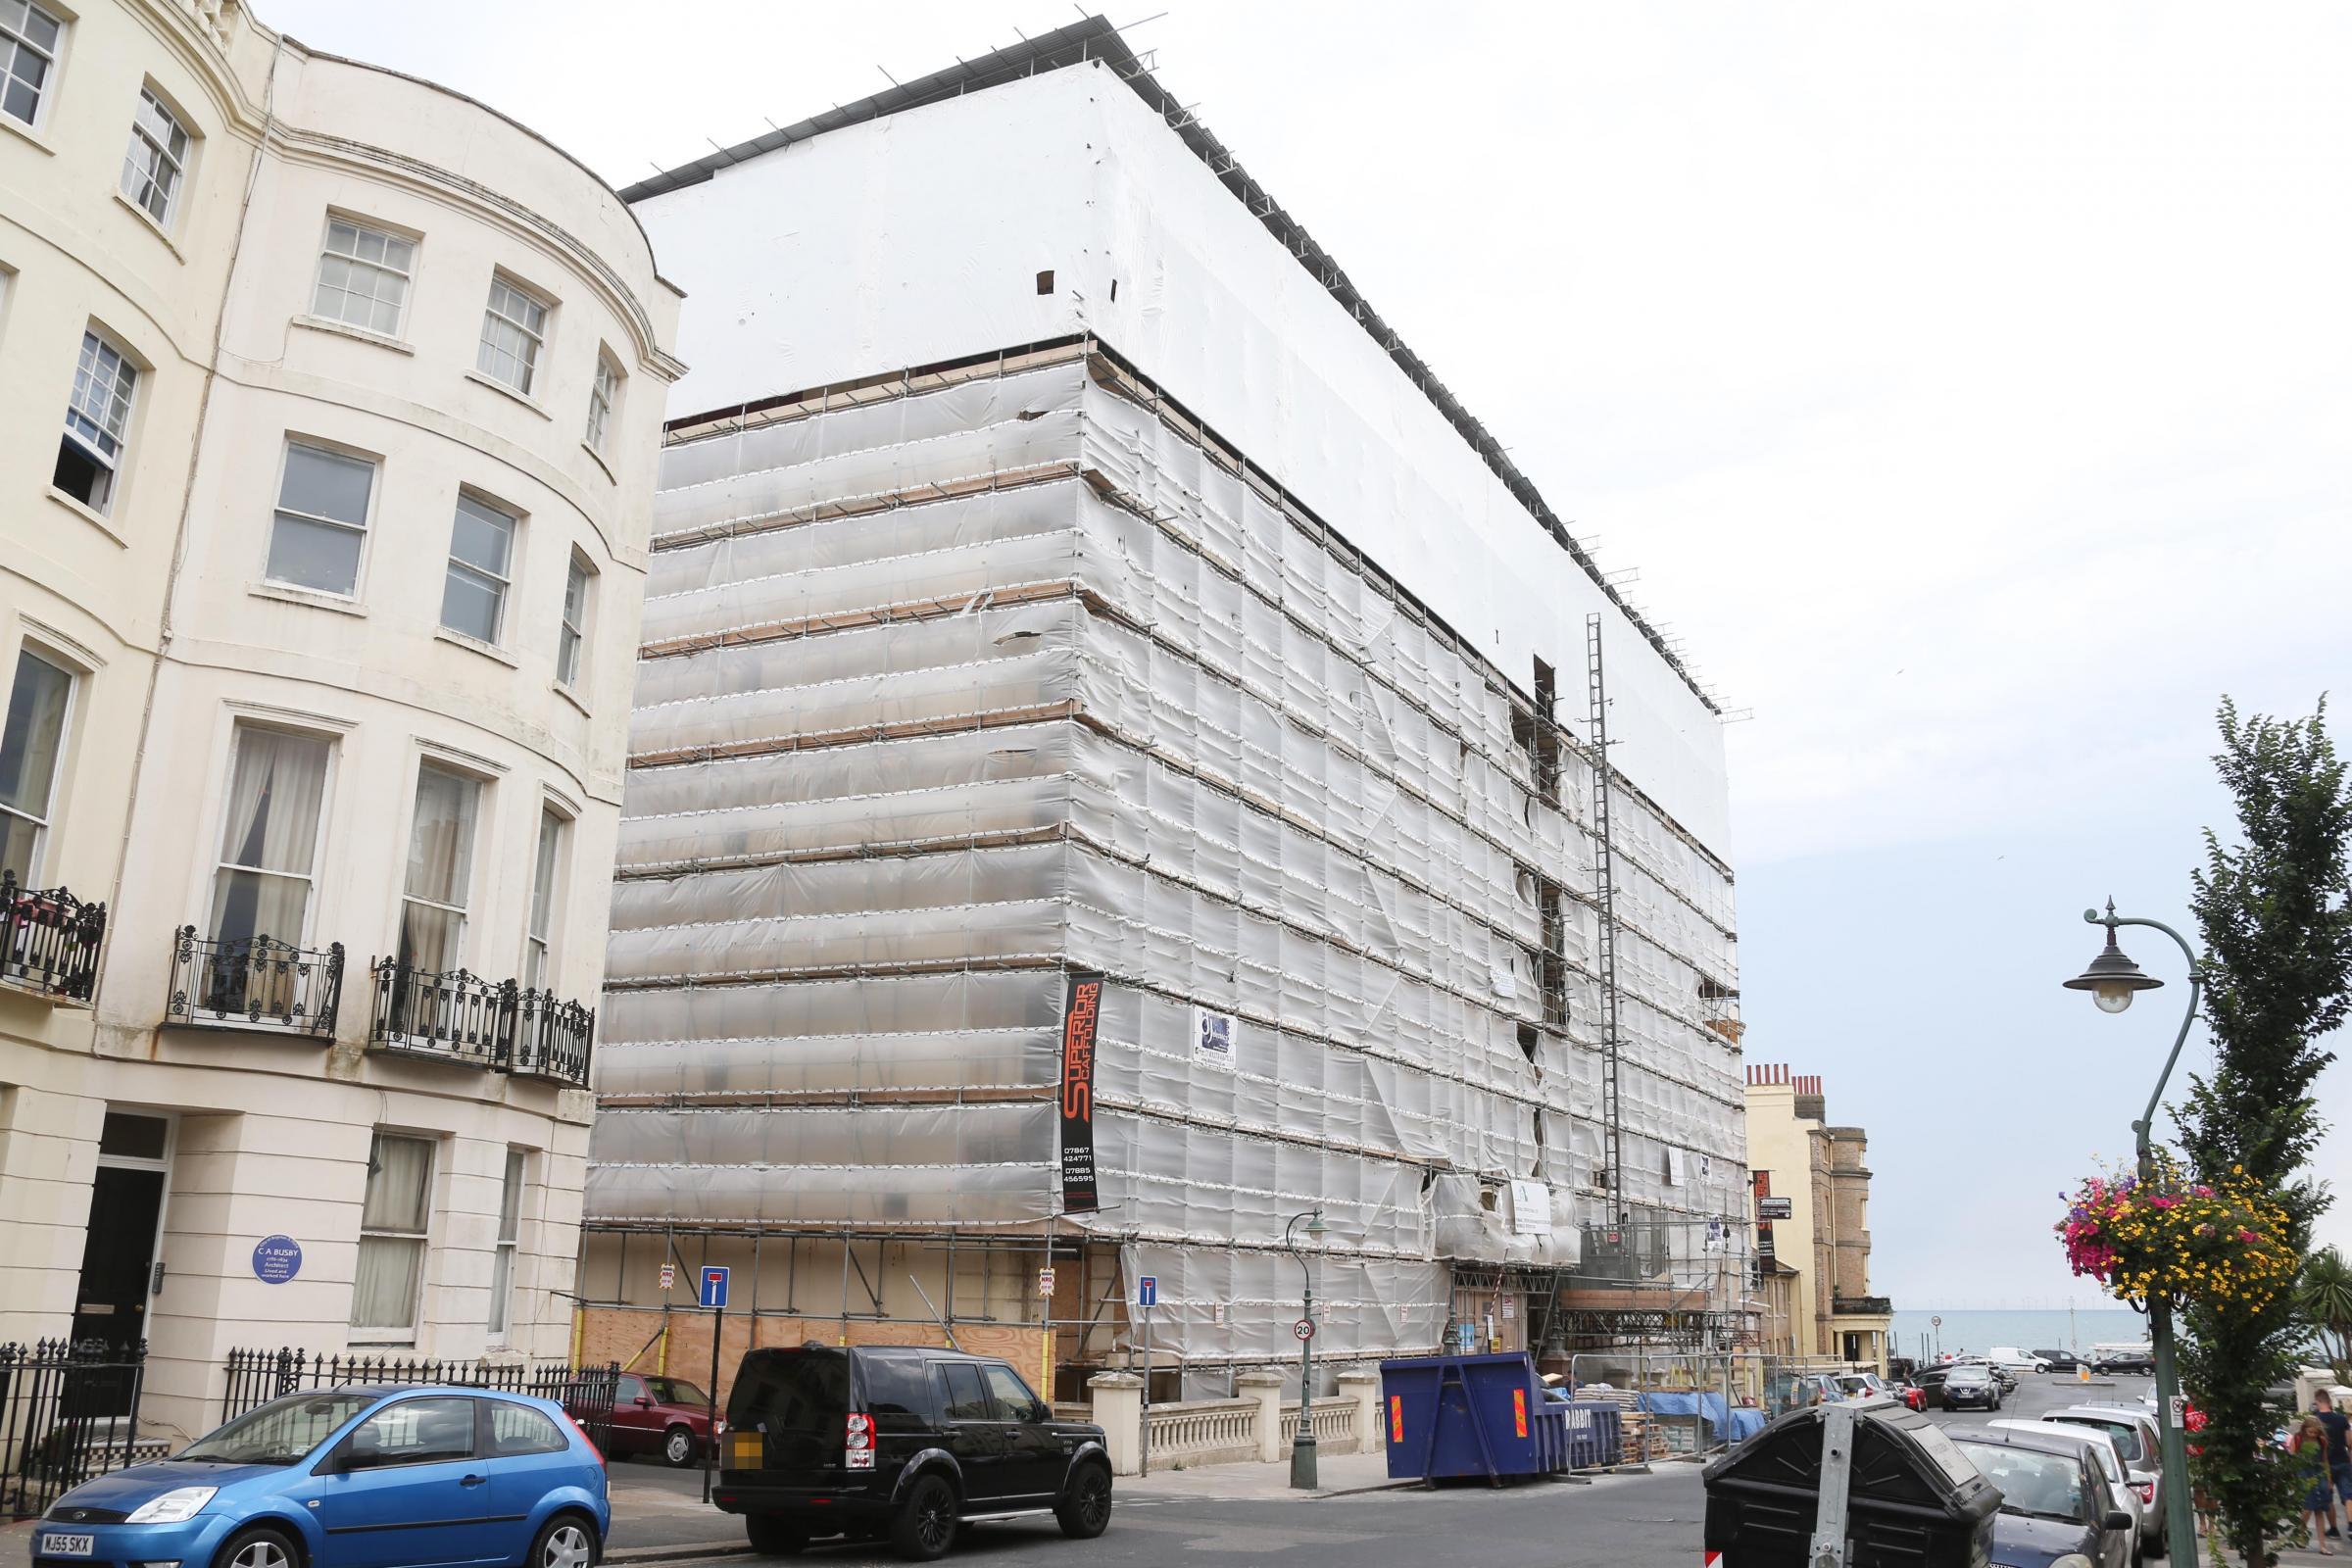 John Spiller has been charged with gross negligence manslaughter over the death of Graham Tester at the former Lansdowne Place Hotel in Brunswick Street, Hove